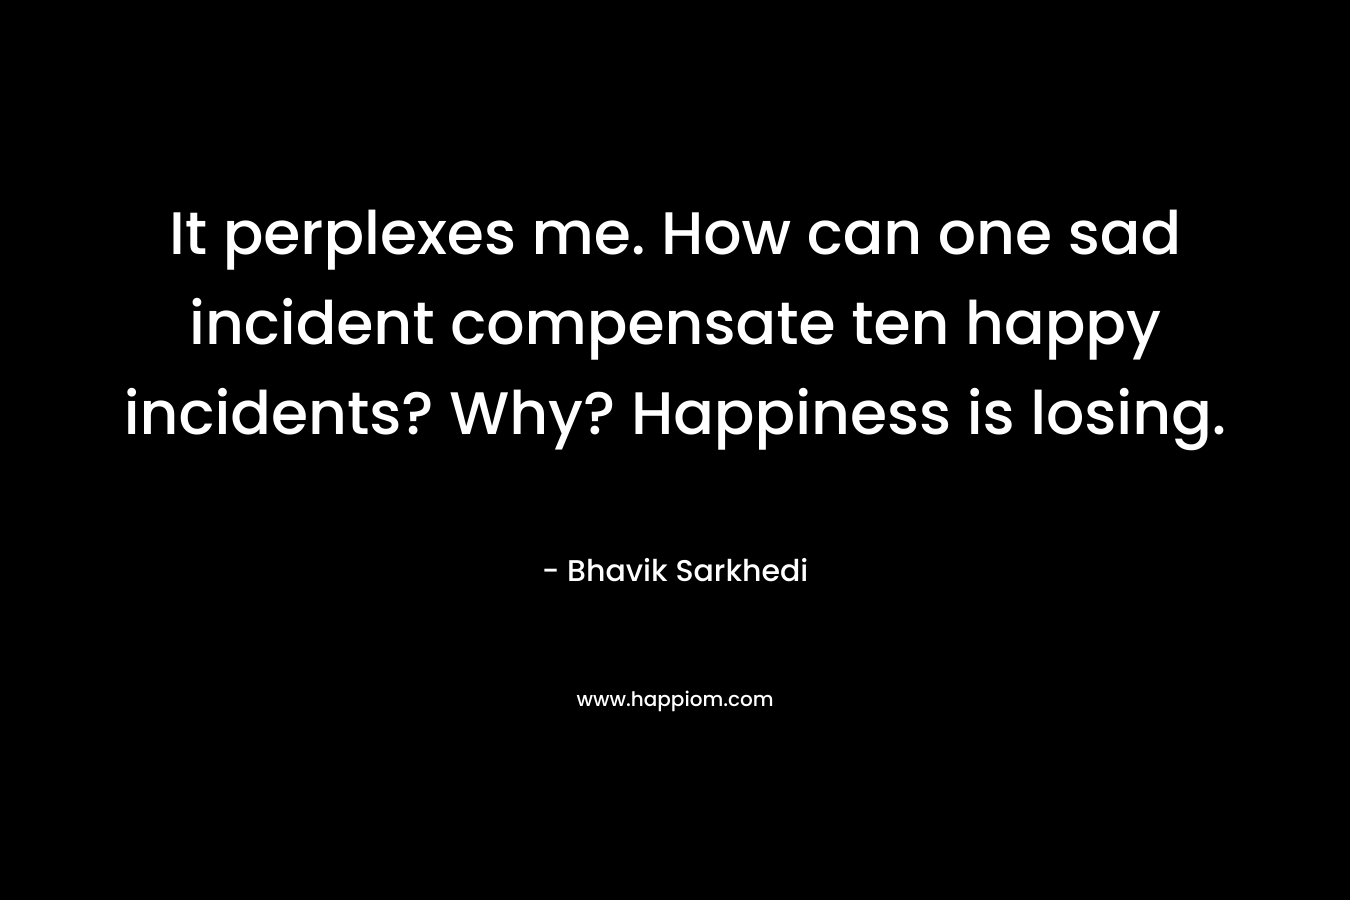 It perplexes me. How can one sad incident compensate ten happy incidents? Why? Happiness is losing. – Bhavik Sarkhedi